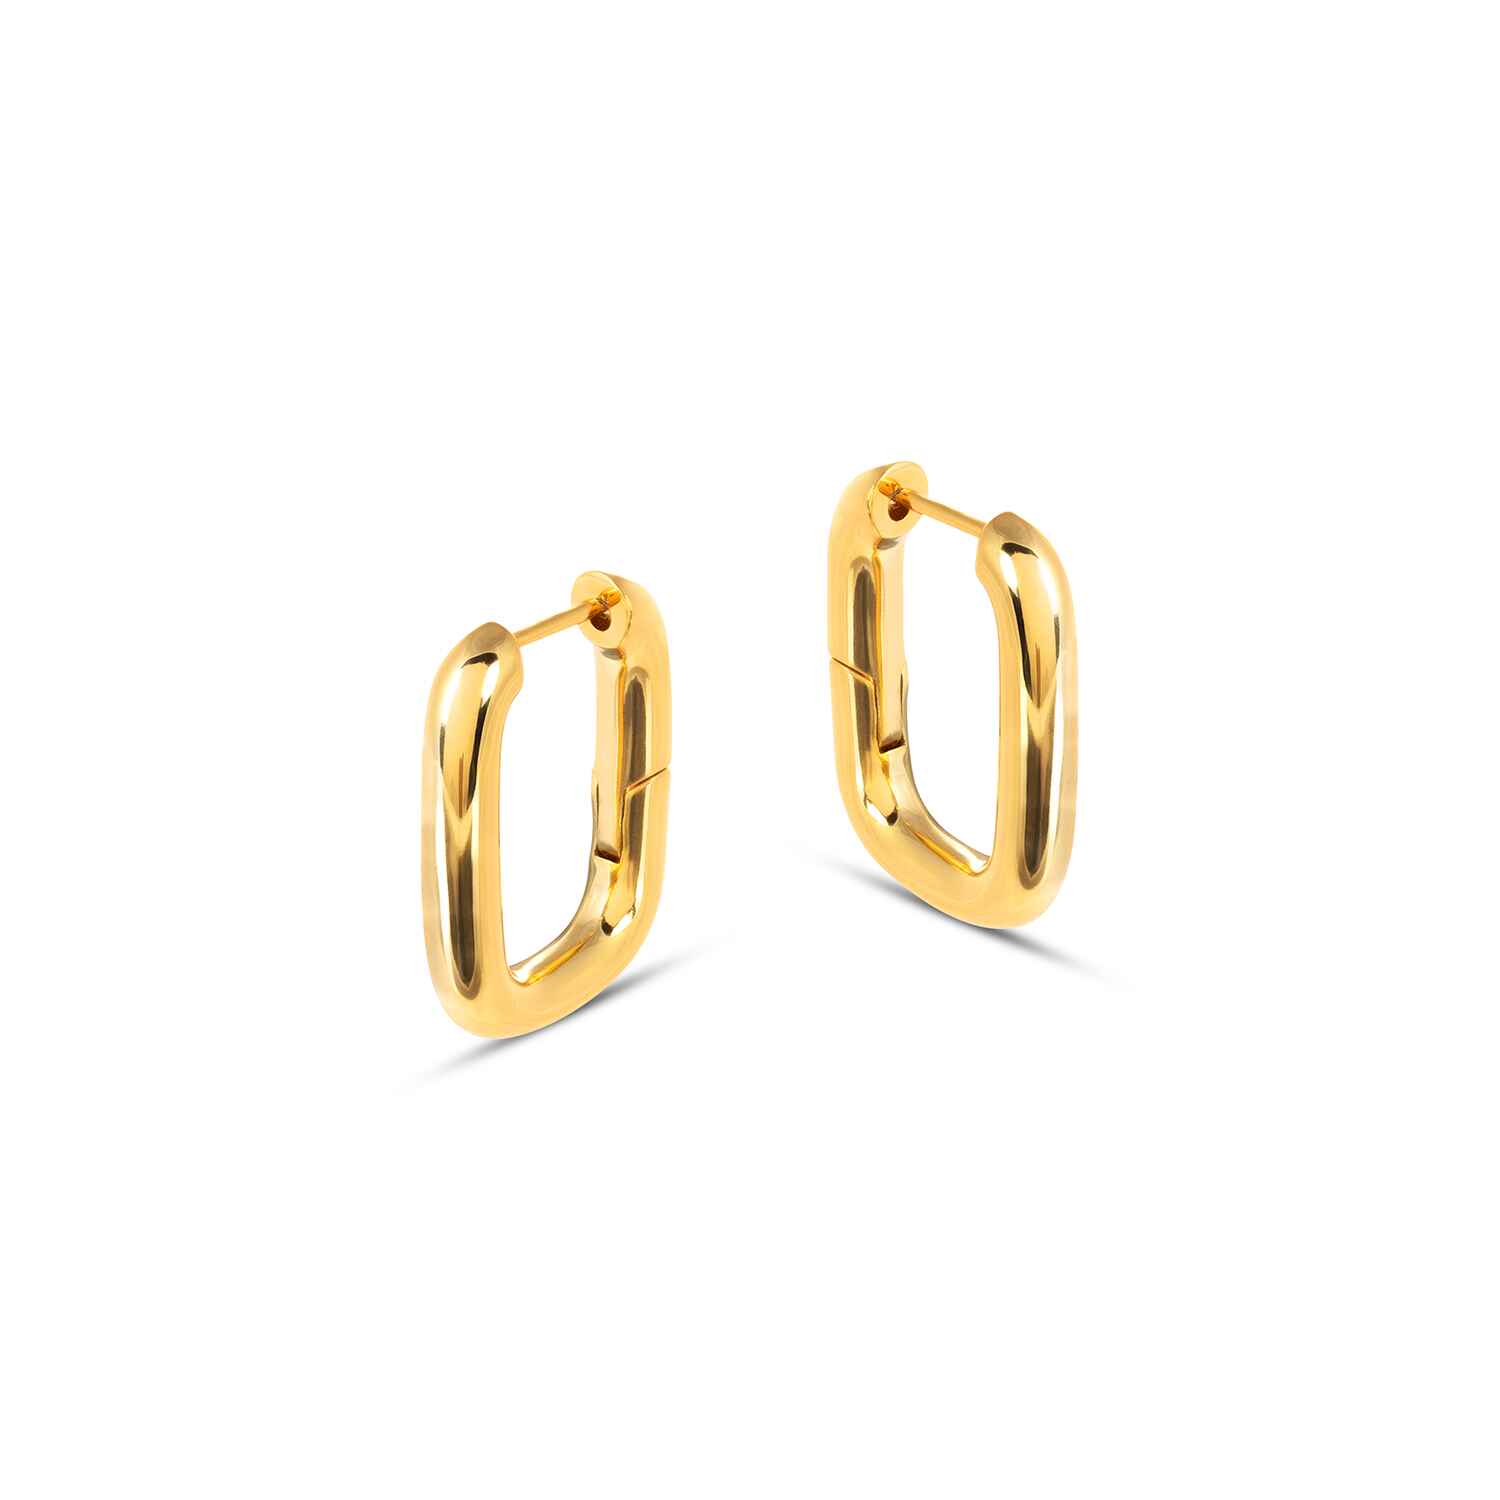 Handcrafted in recycled materials the Bella Chunky Rectangular Gold Earrings feature a chunky rectangular hoop. A styling staple, these minimal yet unmissable hoops are perfect for any occasion.